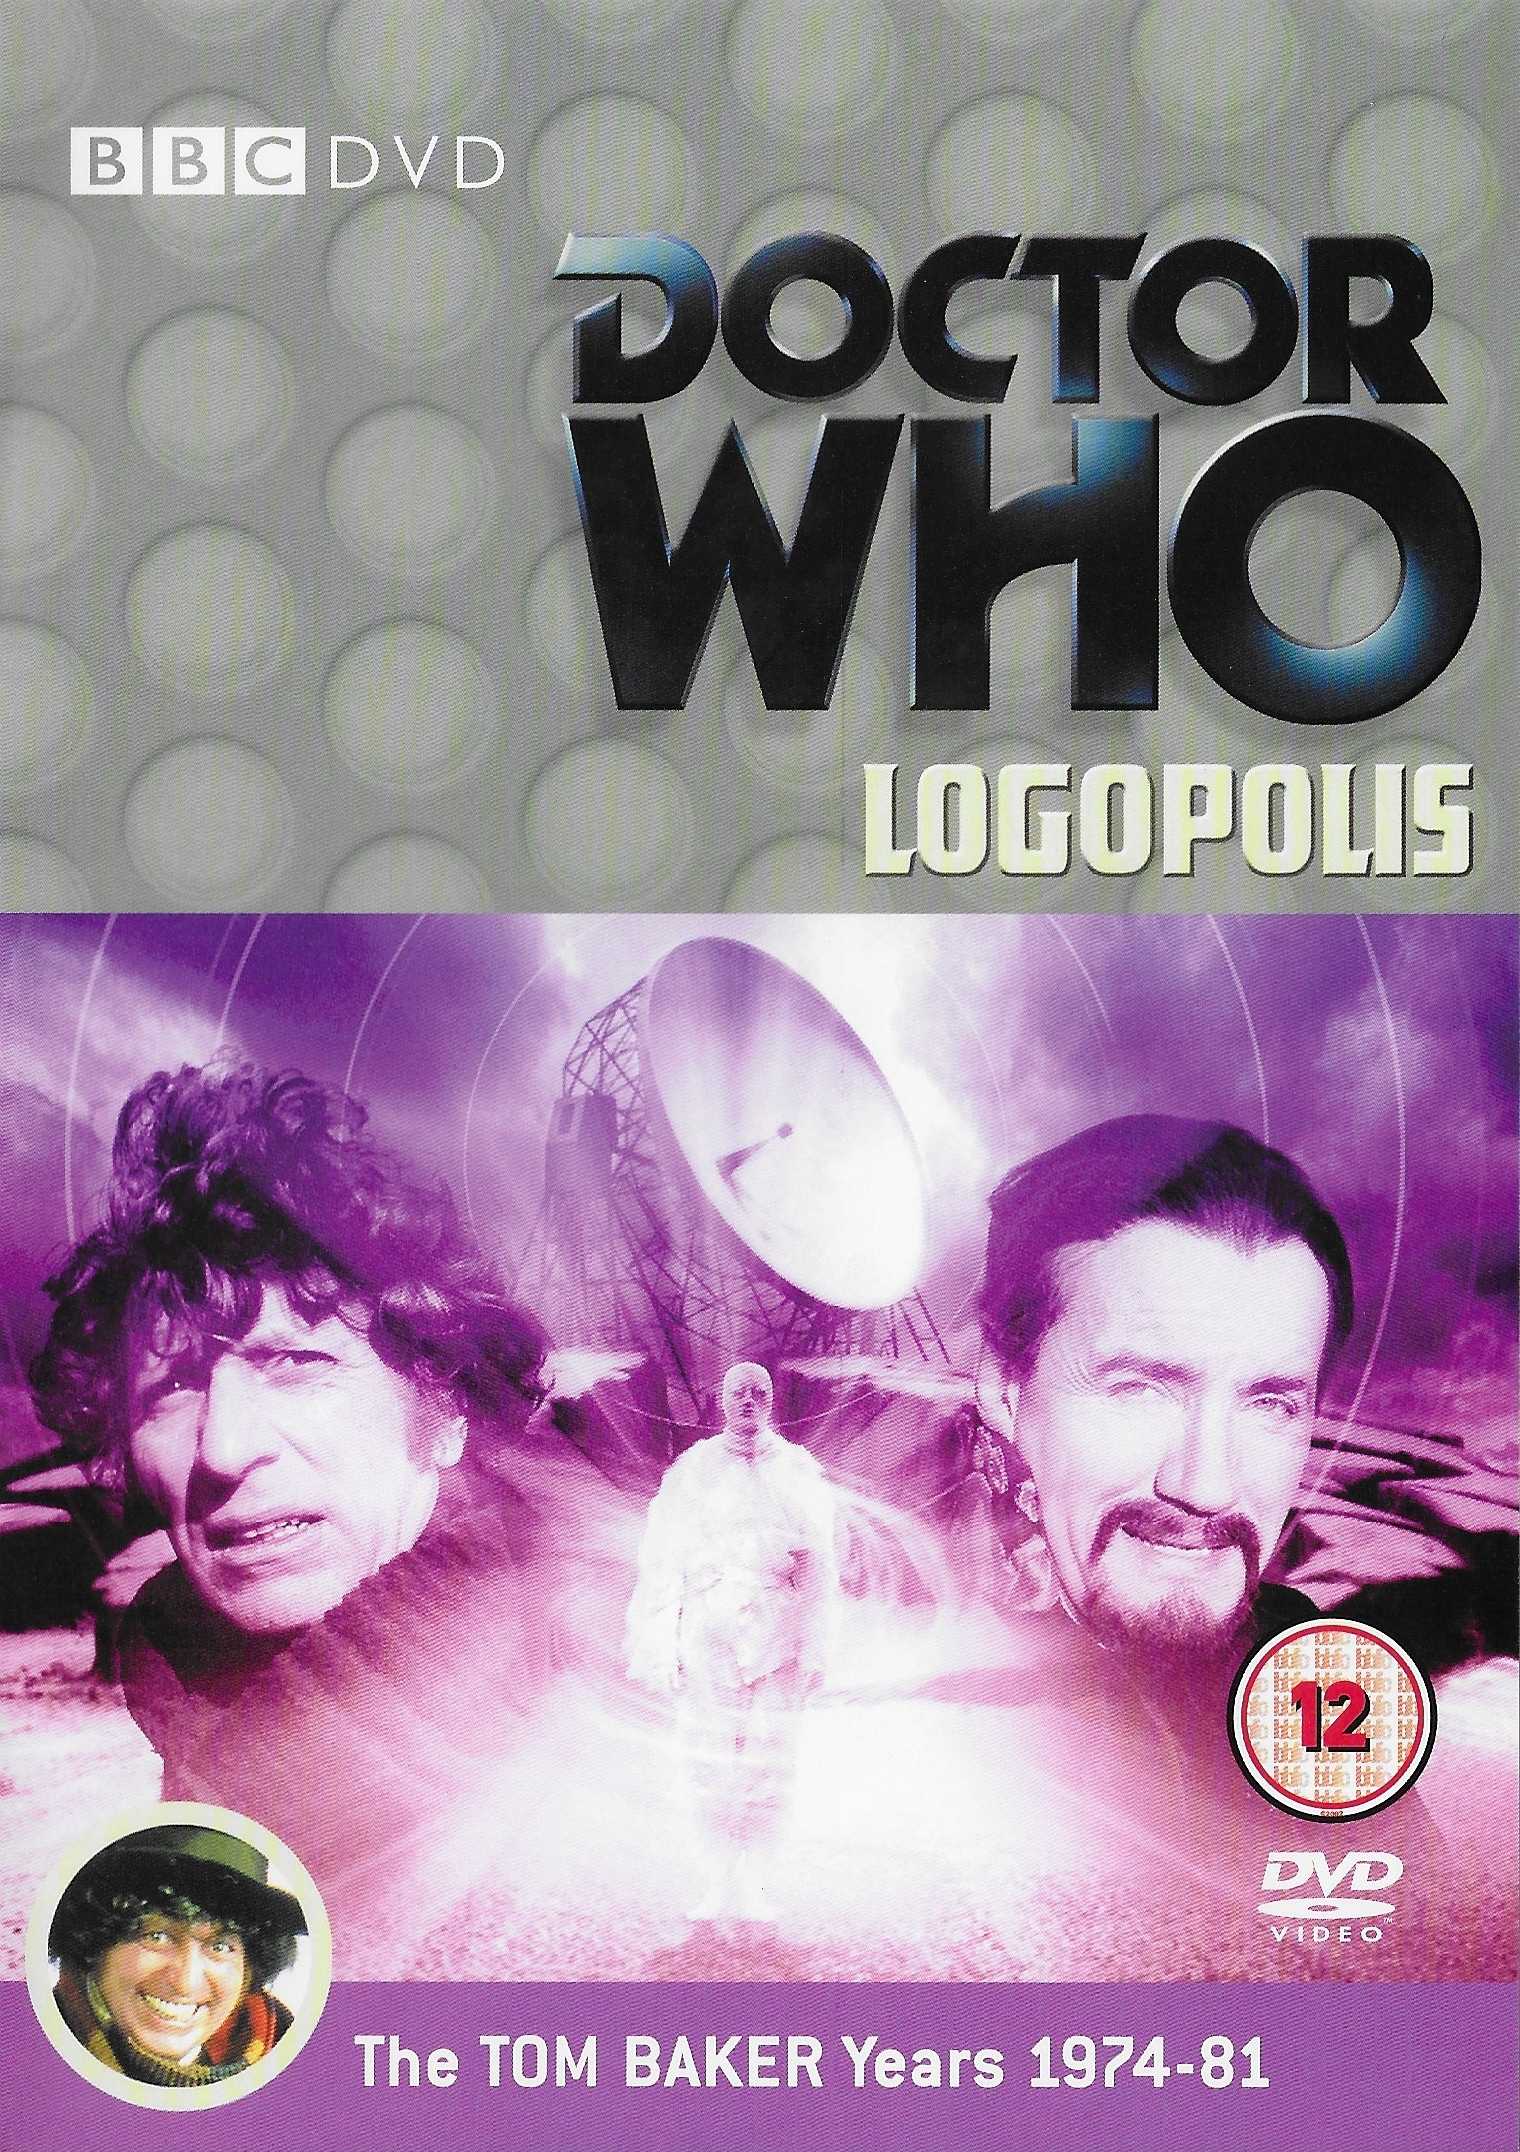 Picture of BBCDVD 1331B Doctor Who - Logopolis by artist Johnny Byrne from the BBC records and Tapes library